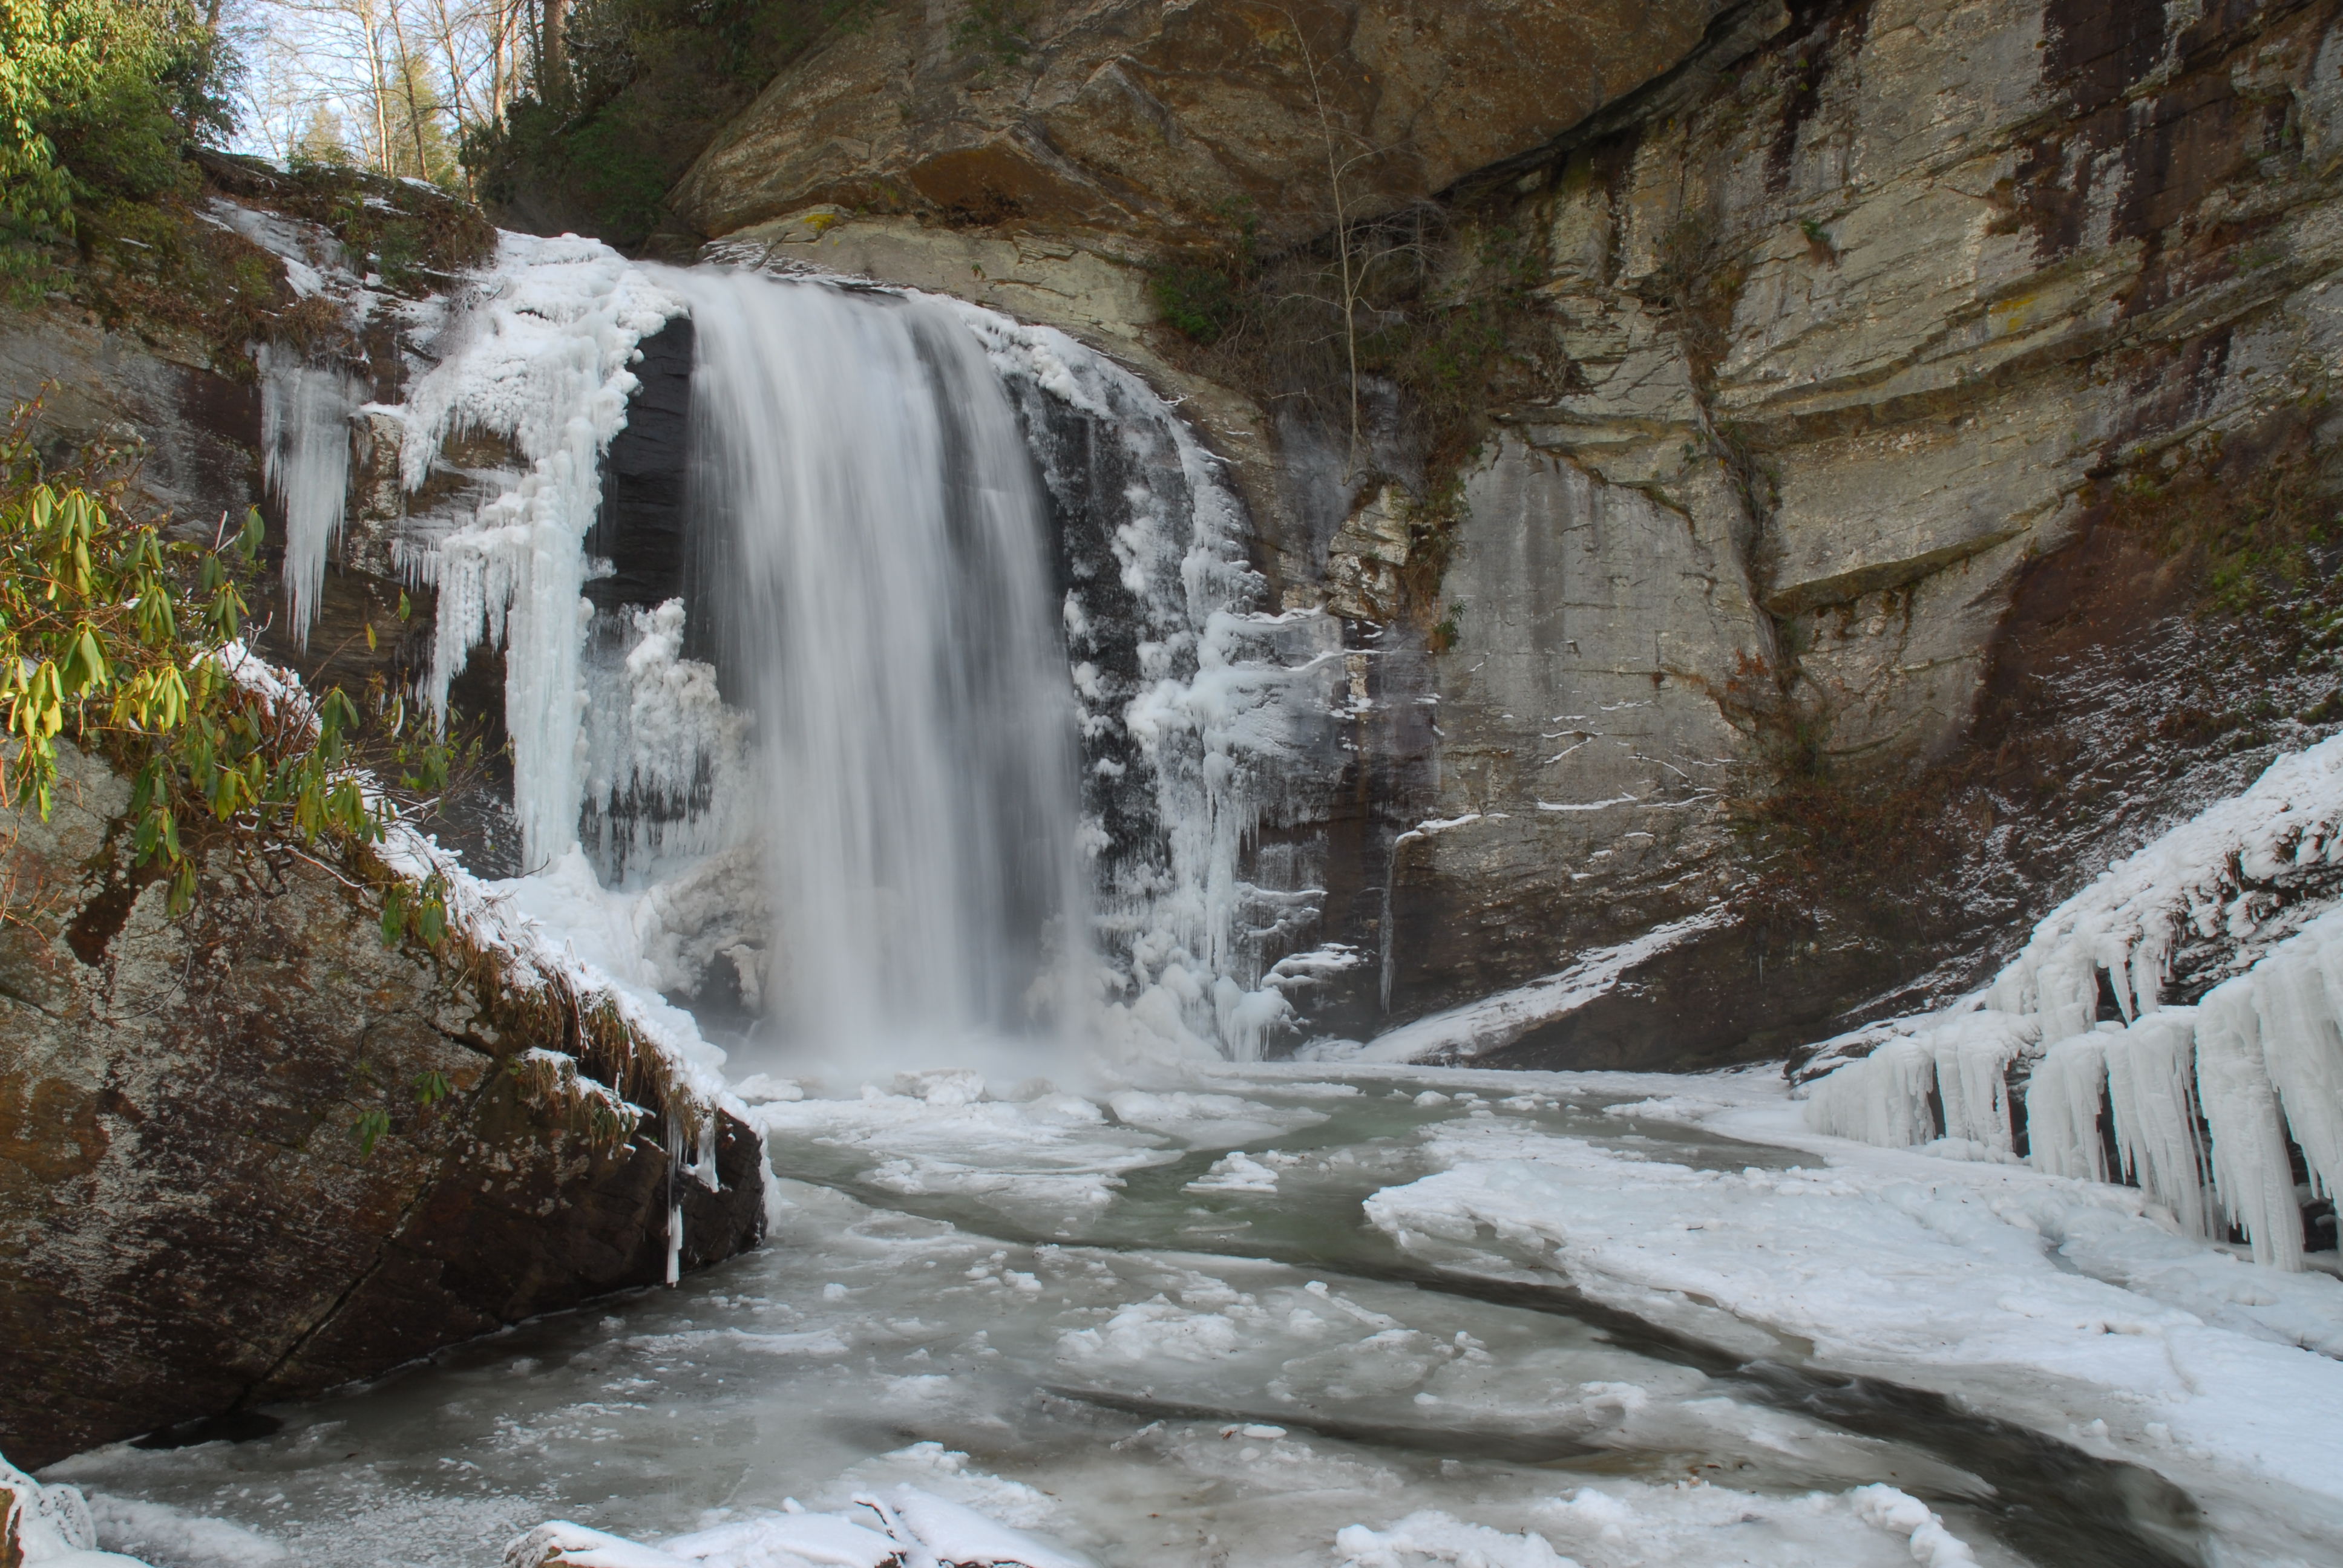 Looking Glass Falls in winter  -  Pisgah National Forest, North Carolina